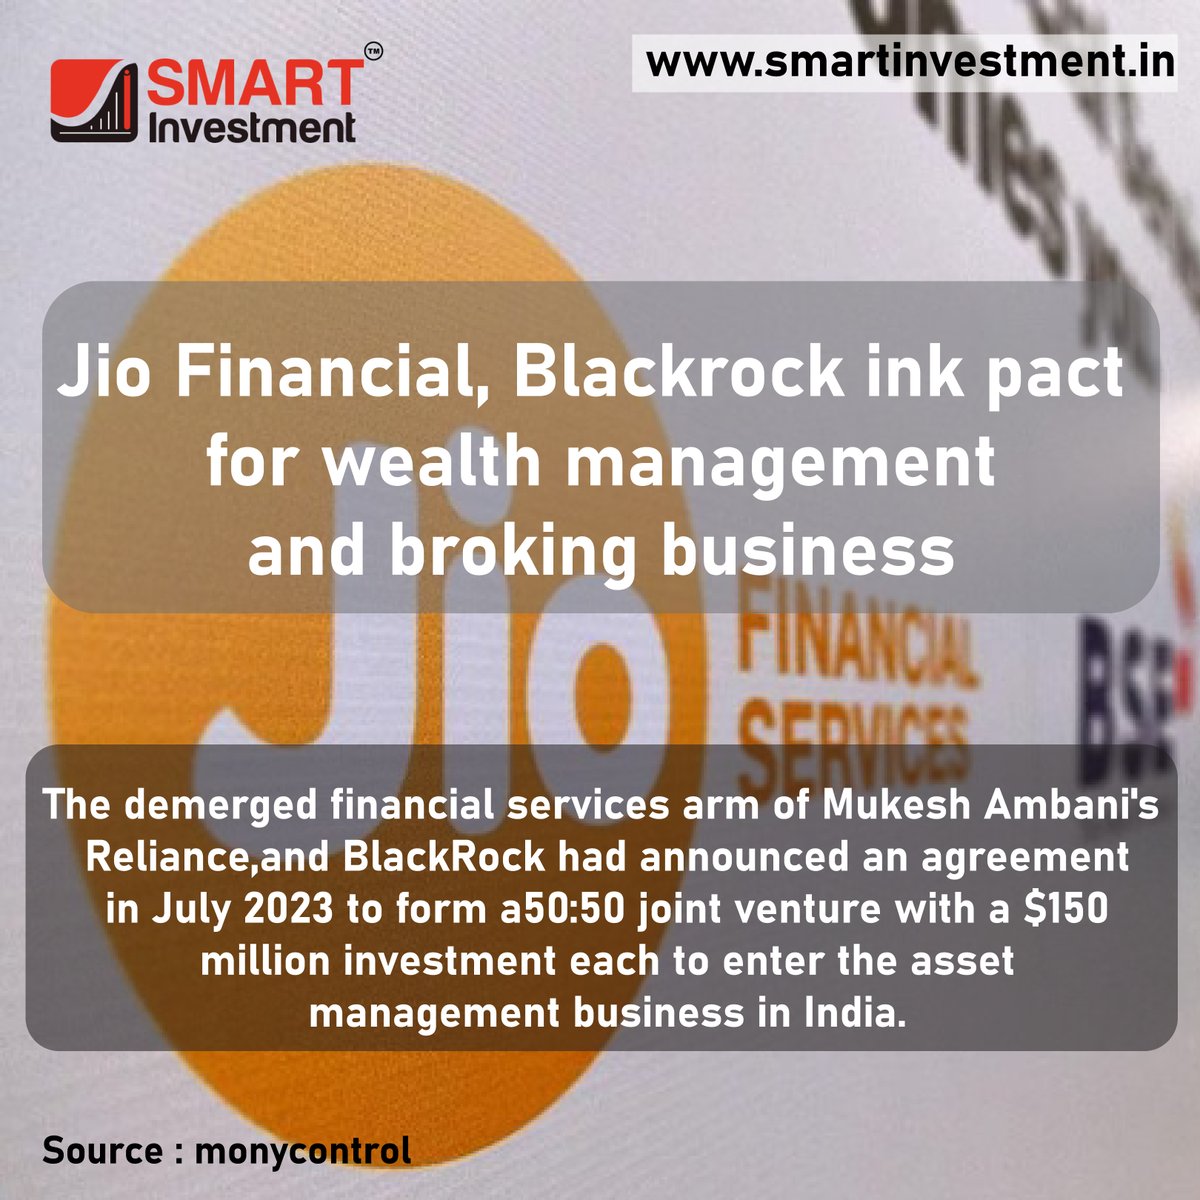 Jio Financial, Blackrock ink pact for wealth management and broking business

Follow for more

#Jio #newsfeed #explorerpage #smartinvestment